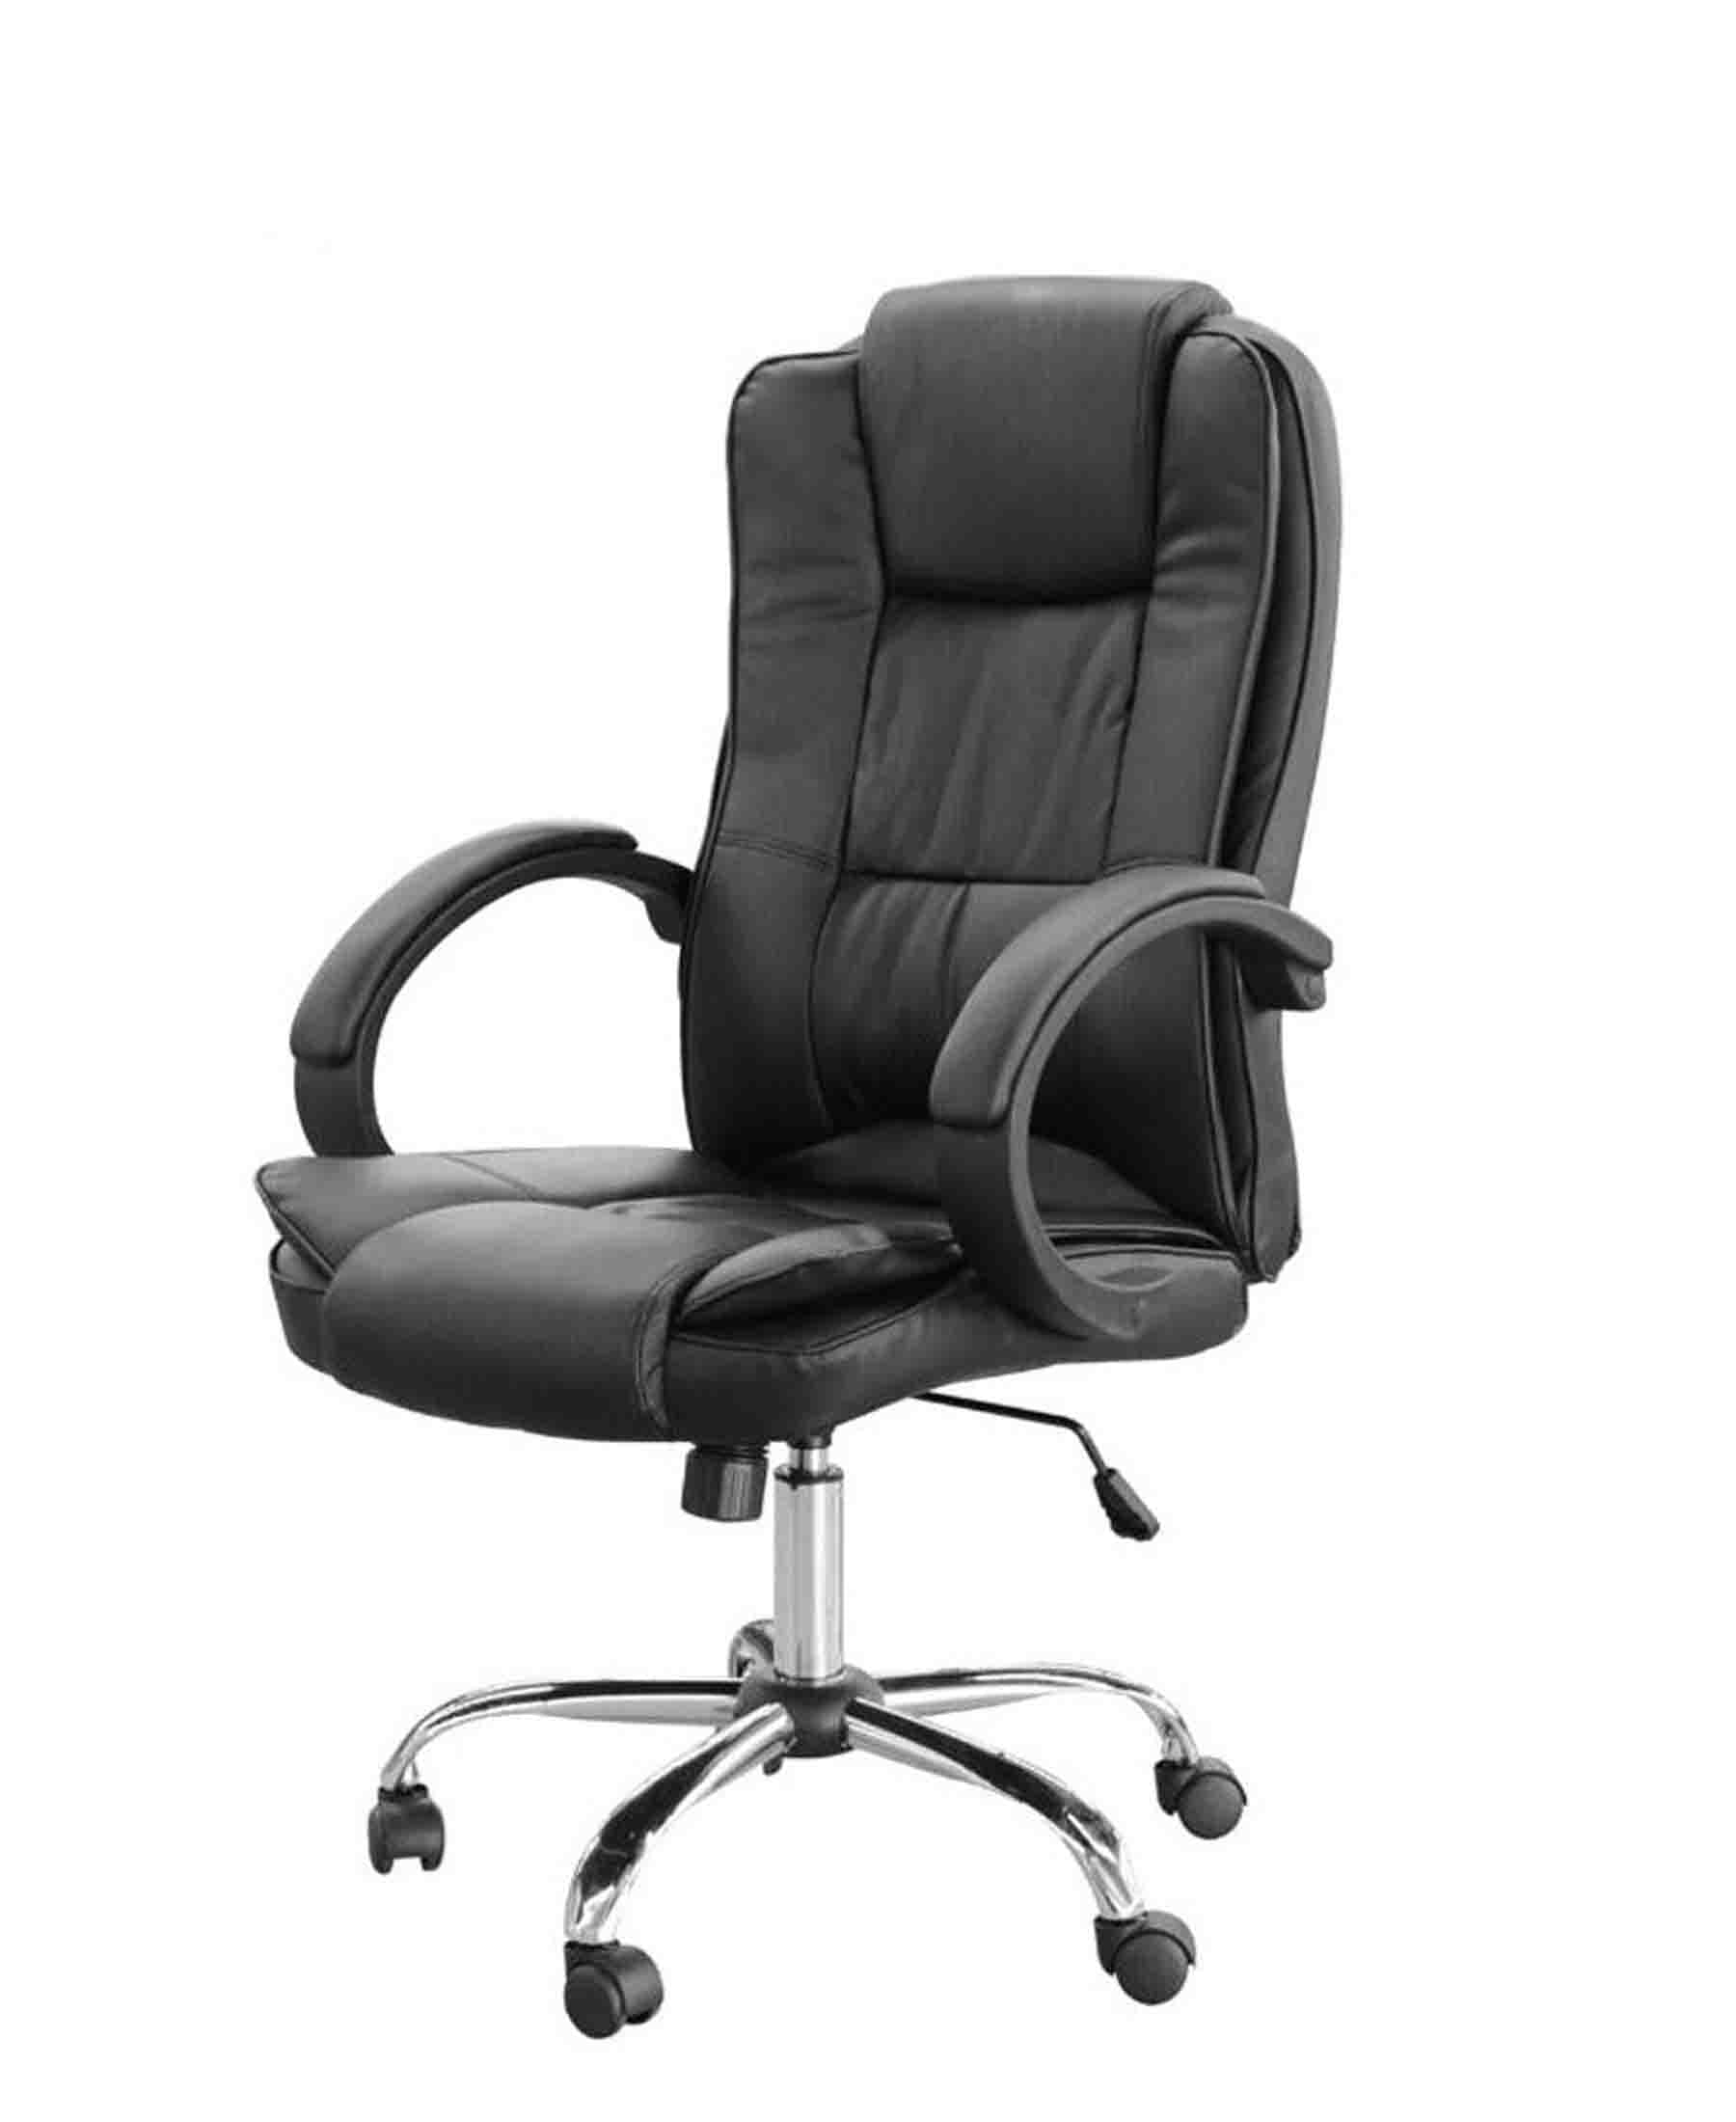 The Office Executive Office Chair – Black